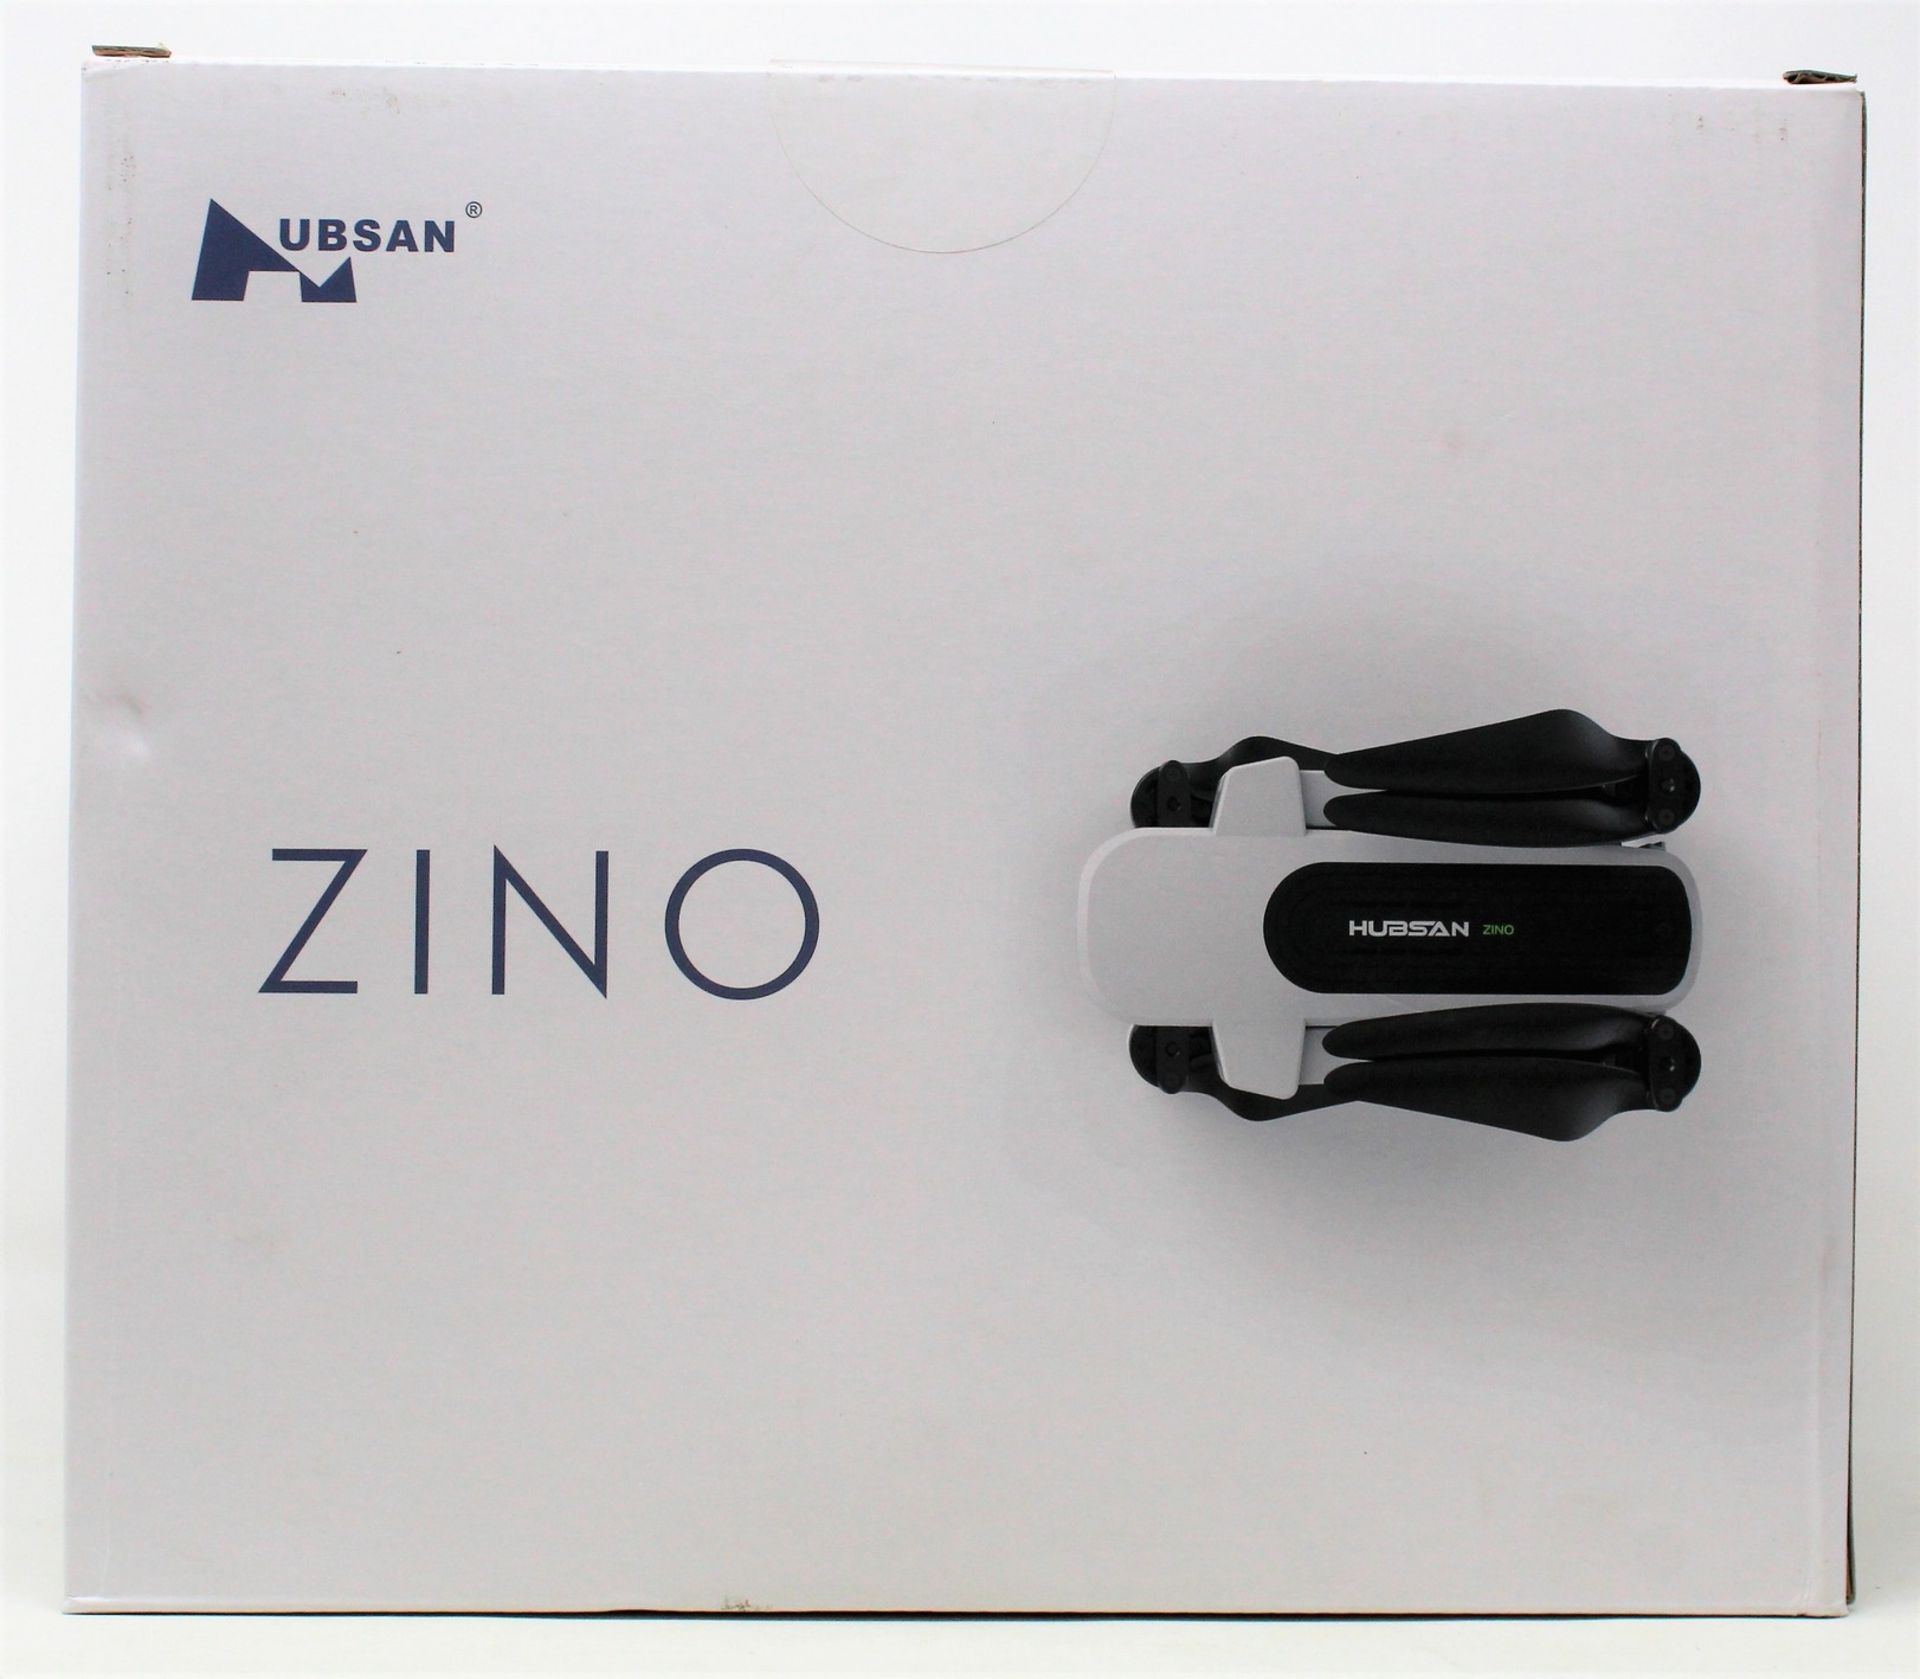 A boxed as new Hubsan Zino Folding Quadcopter Drone with Travel Bag (UK plug adapter required).